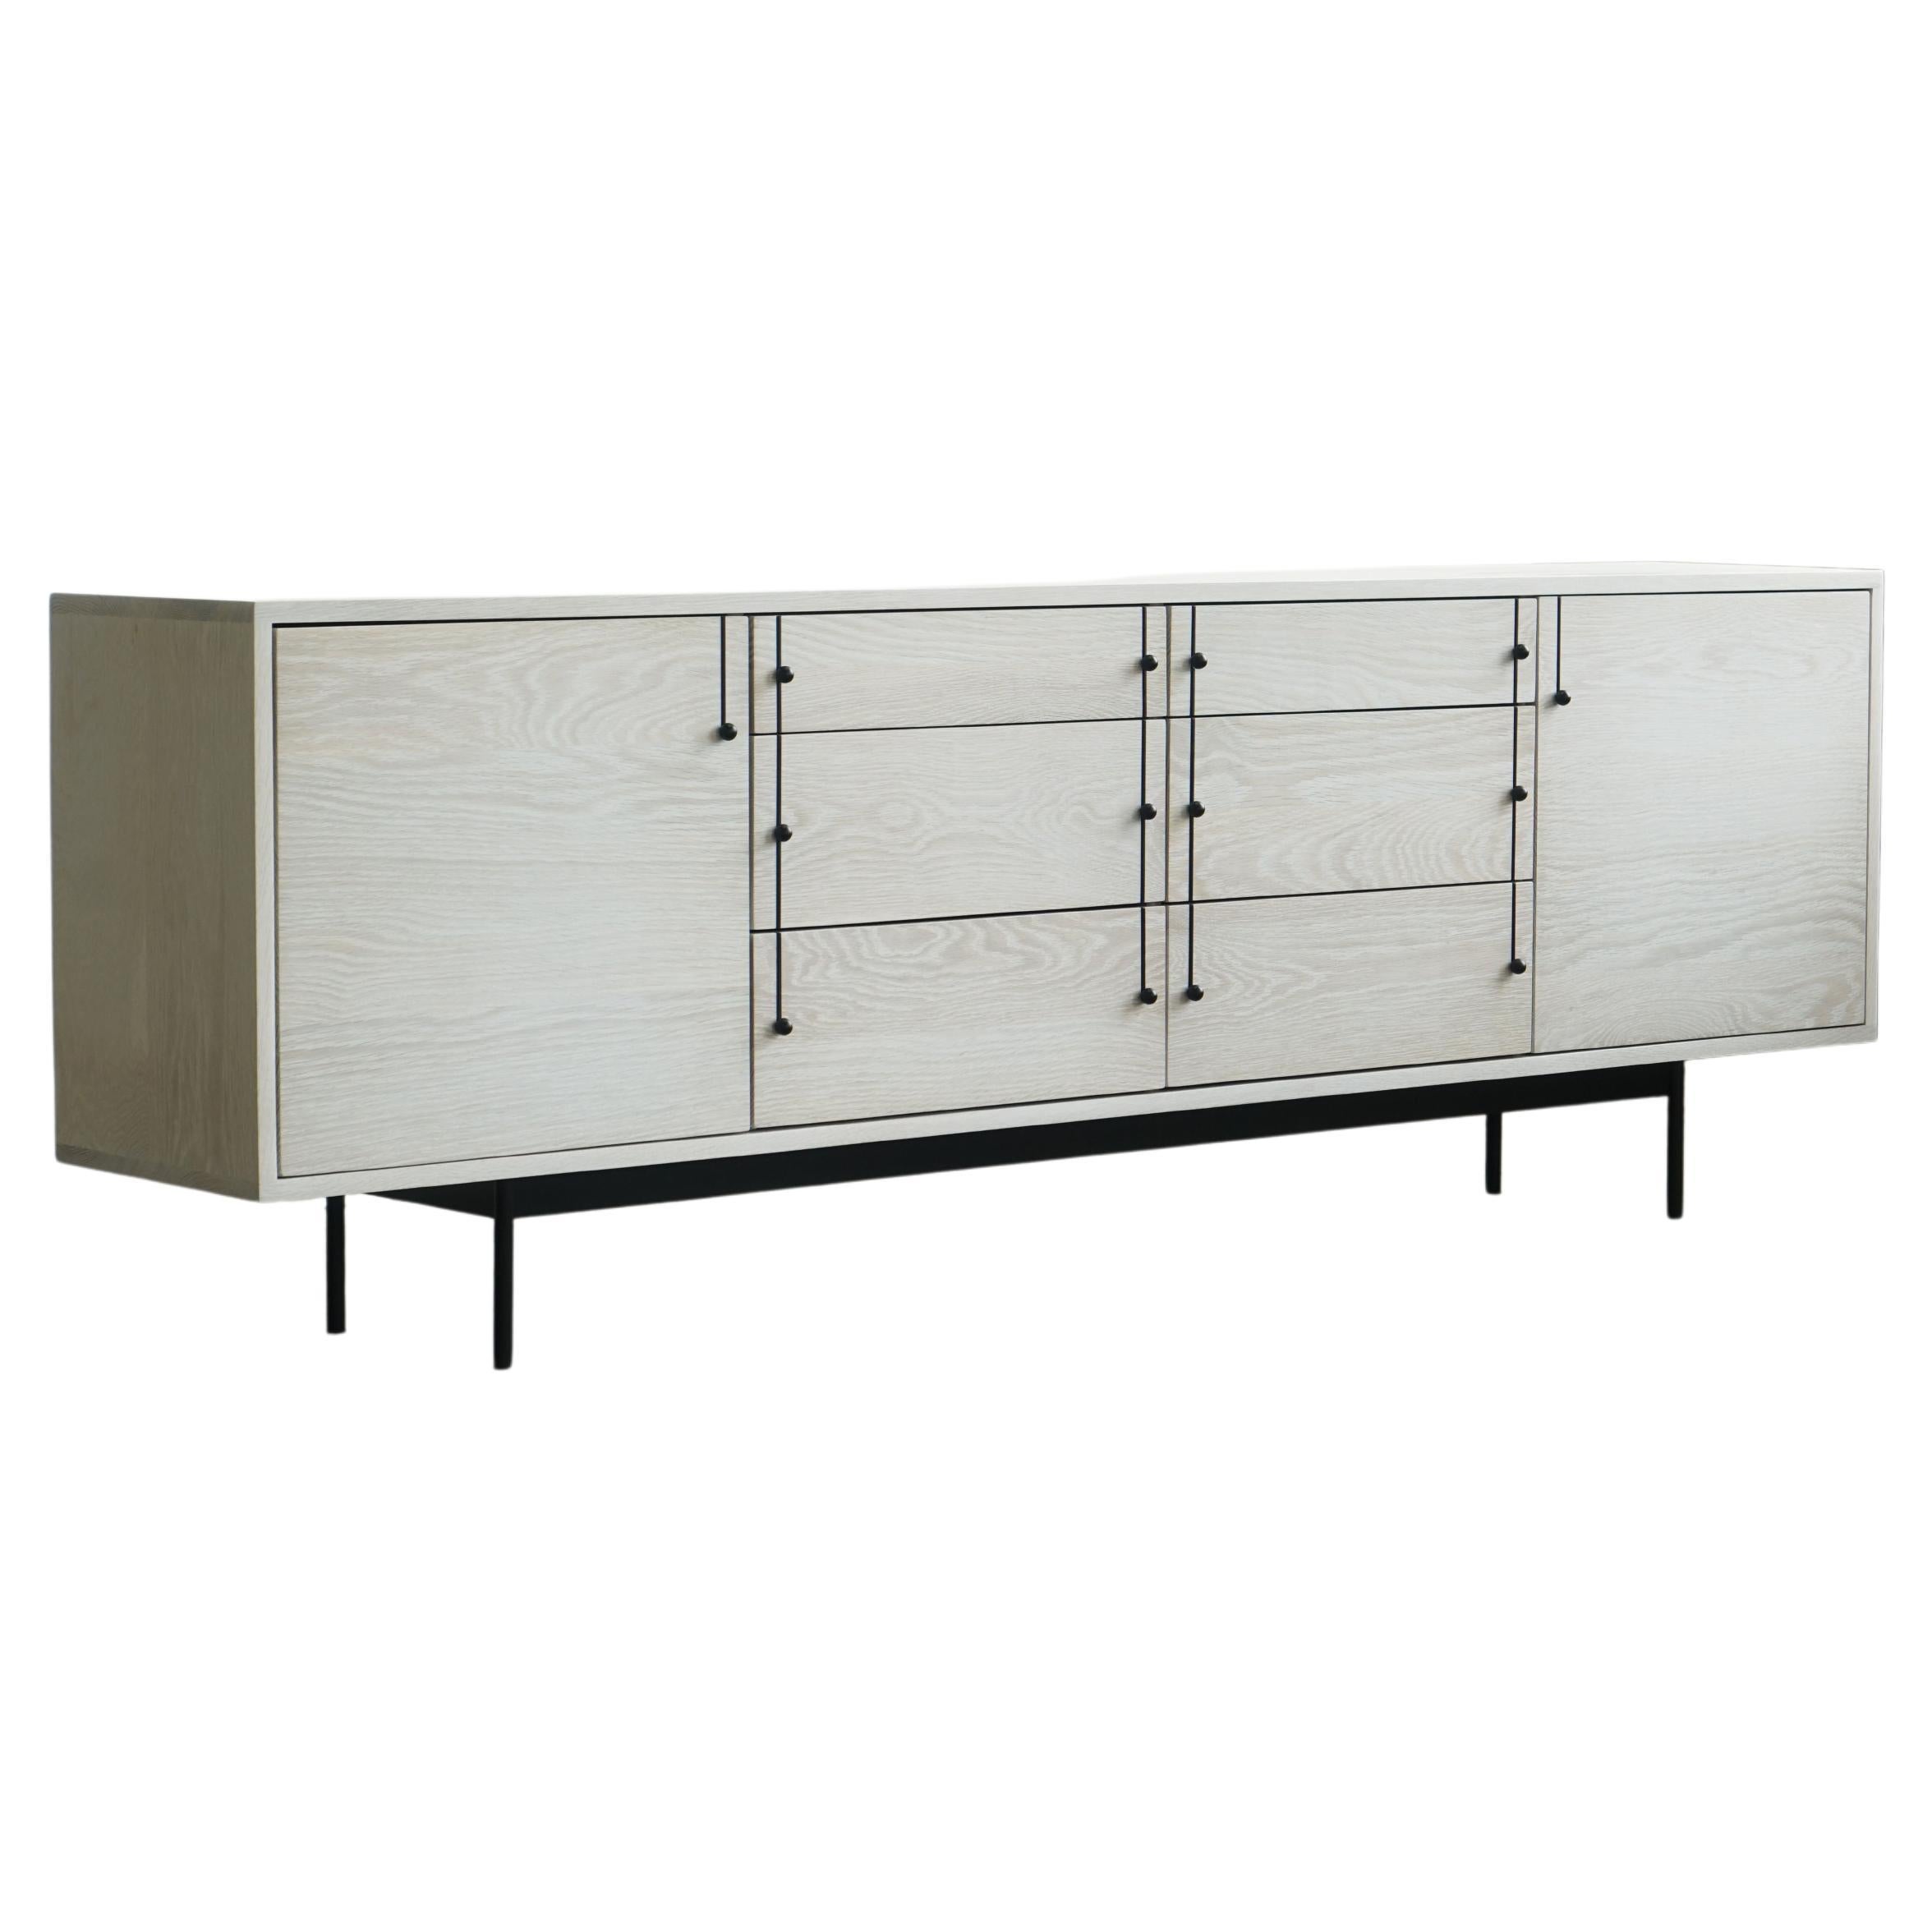 Bleached White Oak "Credenza B" by Last Workshop, Made to Order For Sale